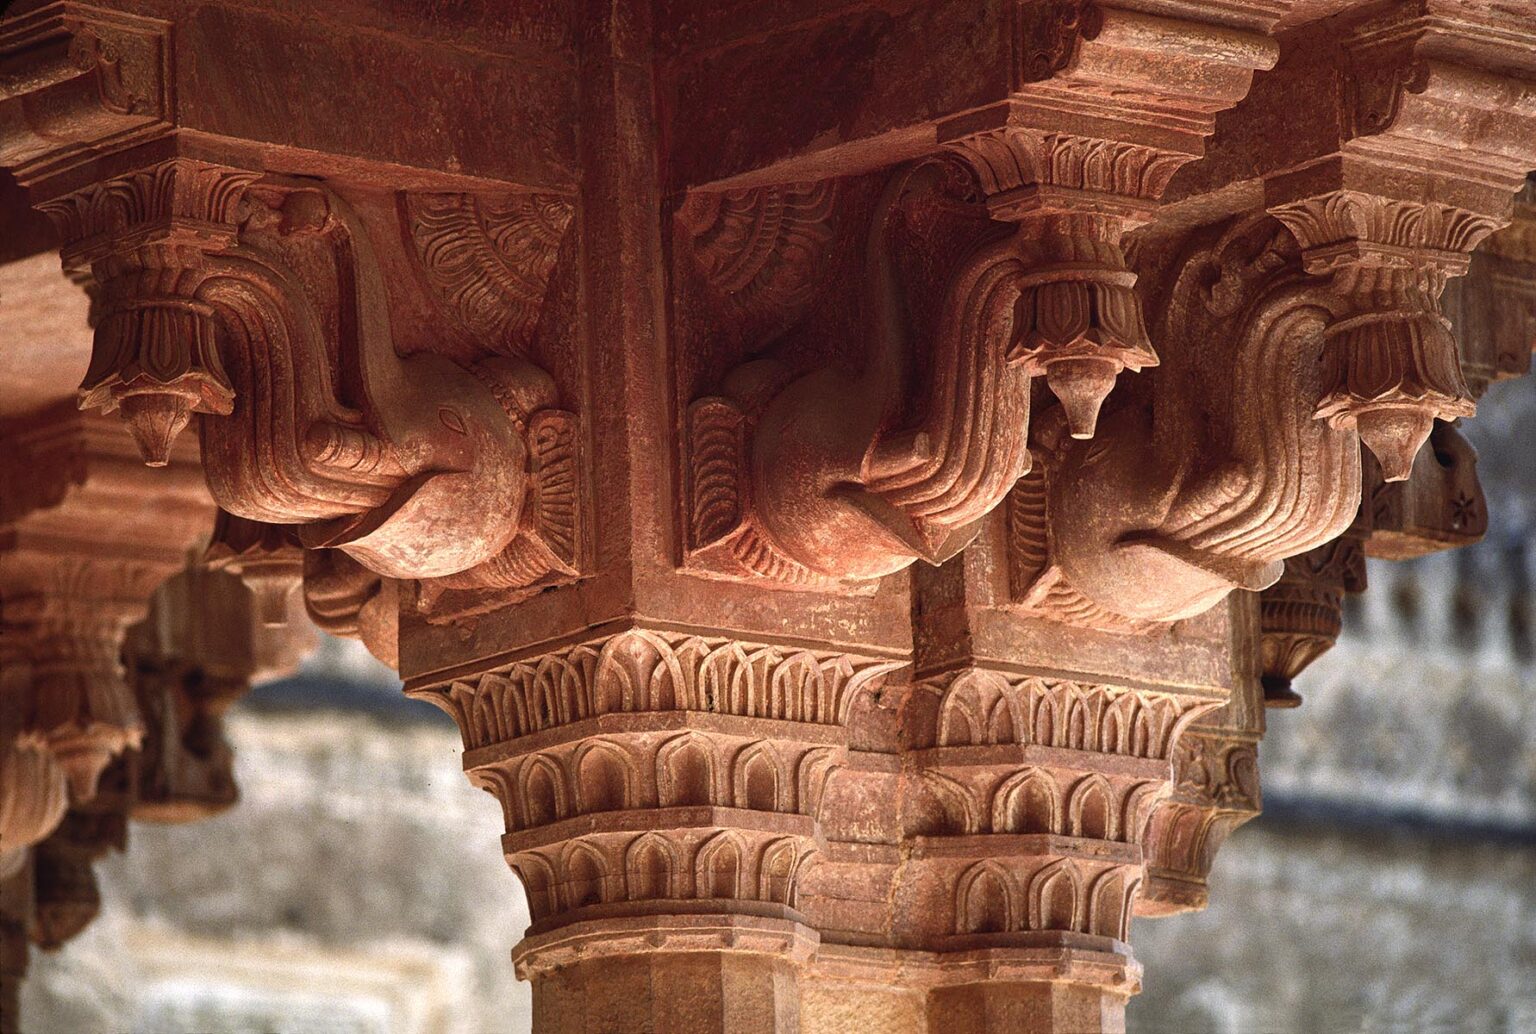 Detail of STONE CARVED ELEPHANTS at the head of a COLUMN at the AMBER FORT near JAIPUR - RAJASTHAN, INDIA